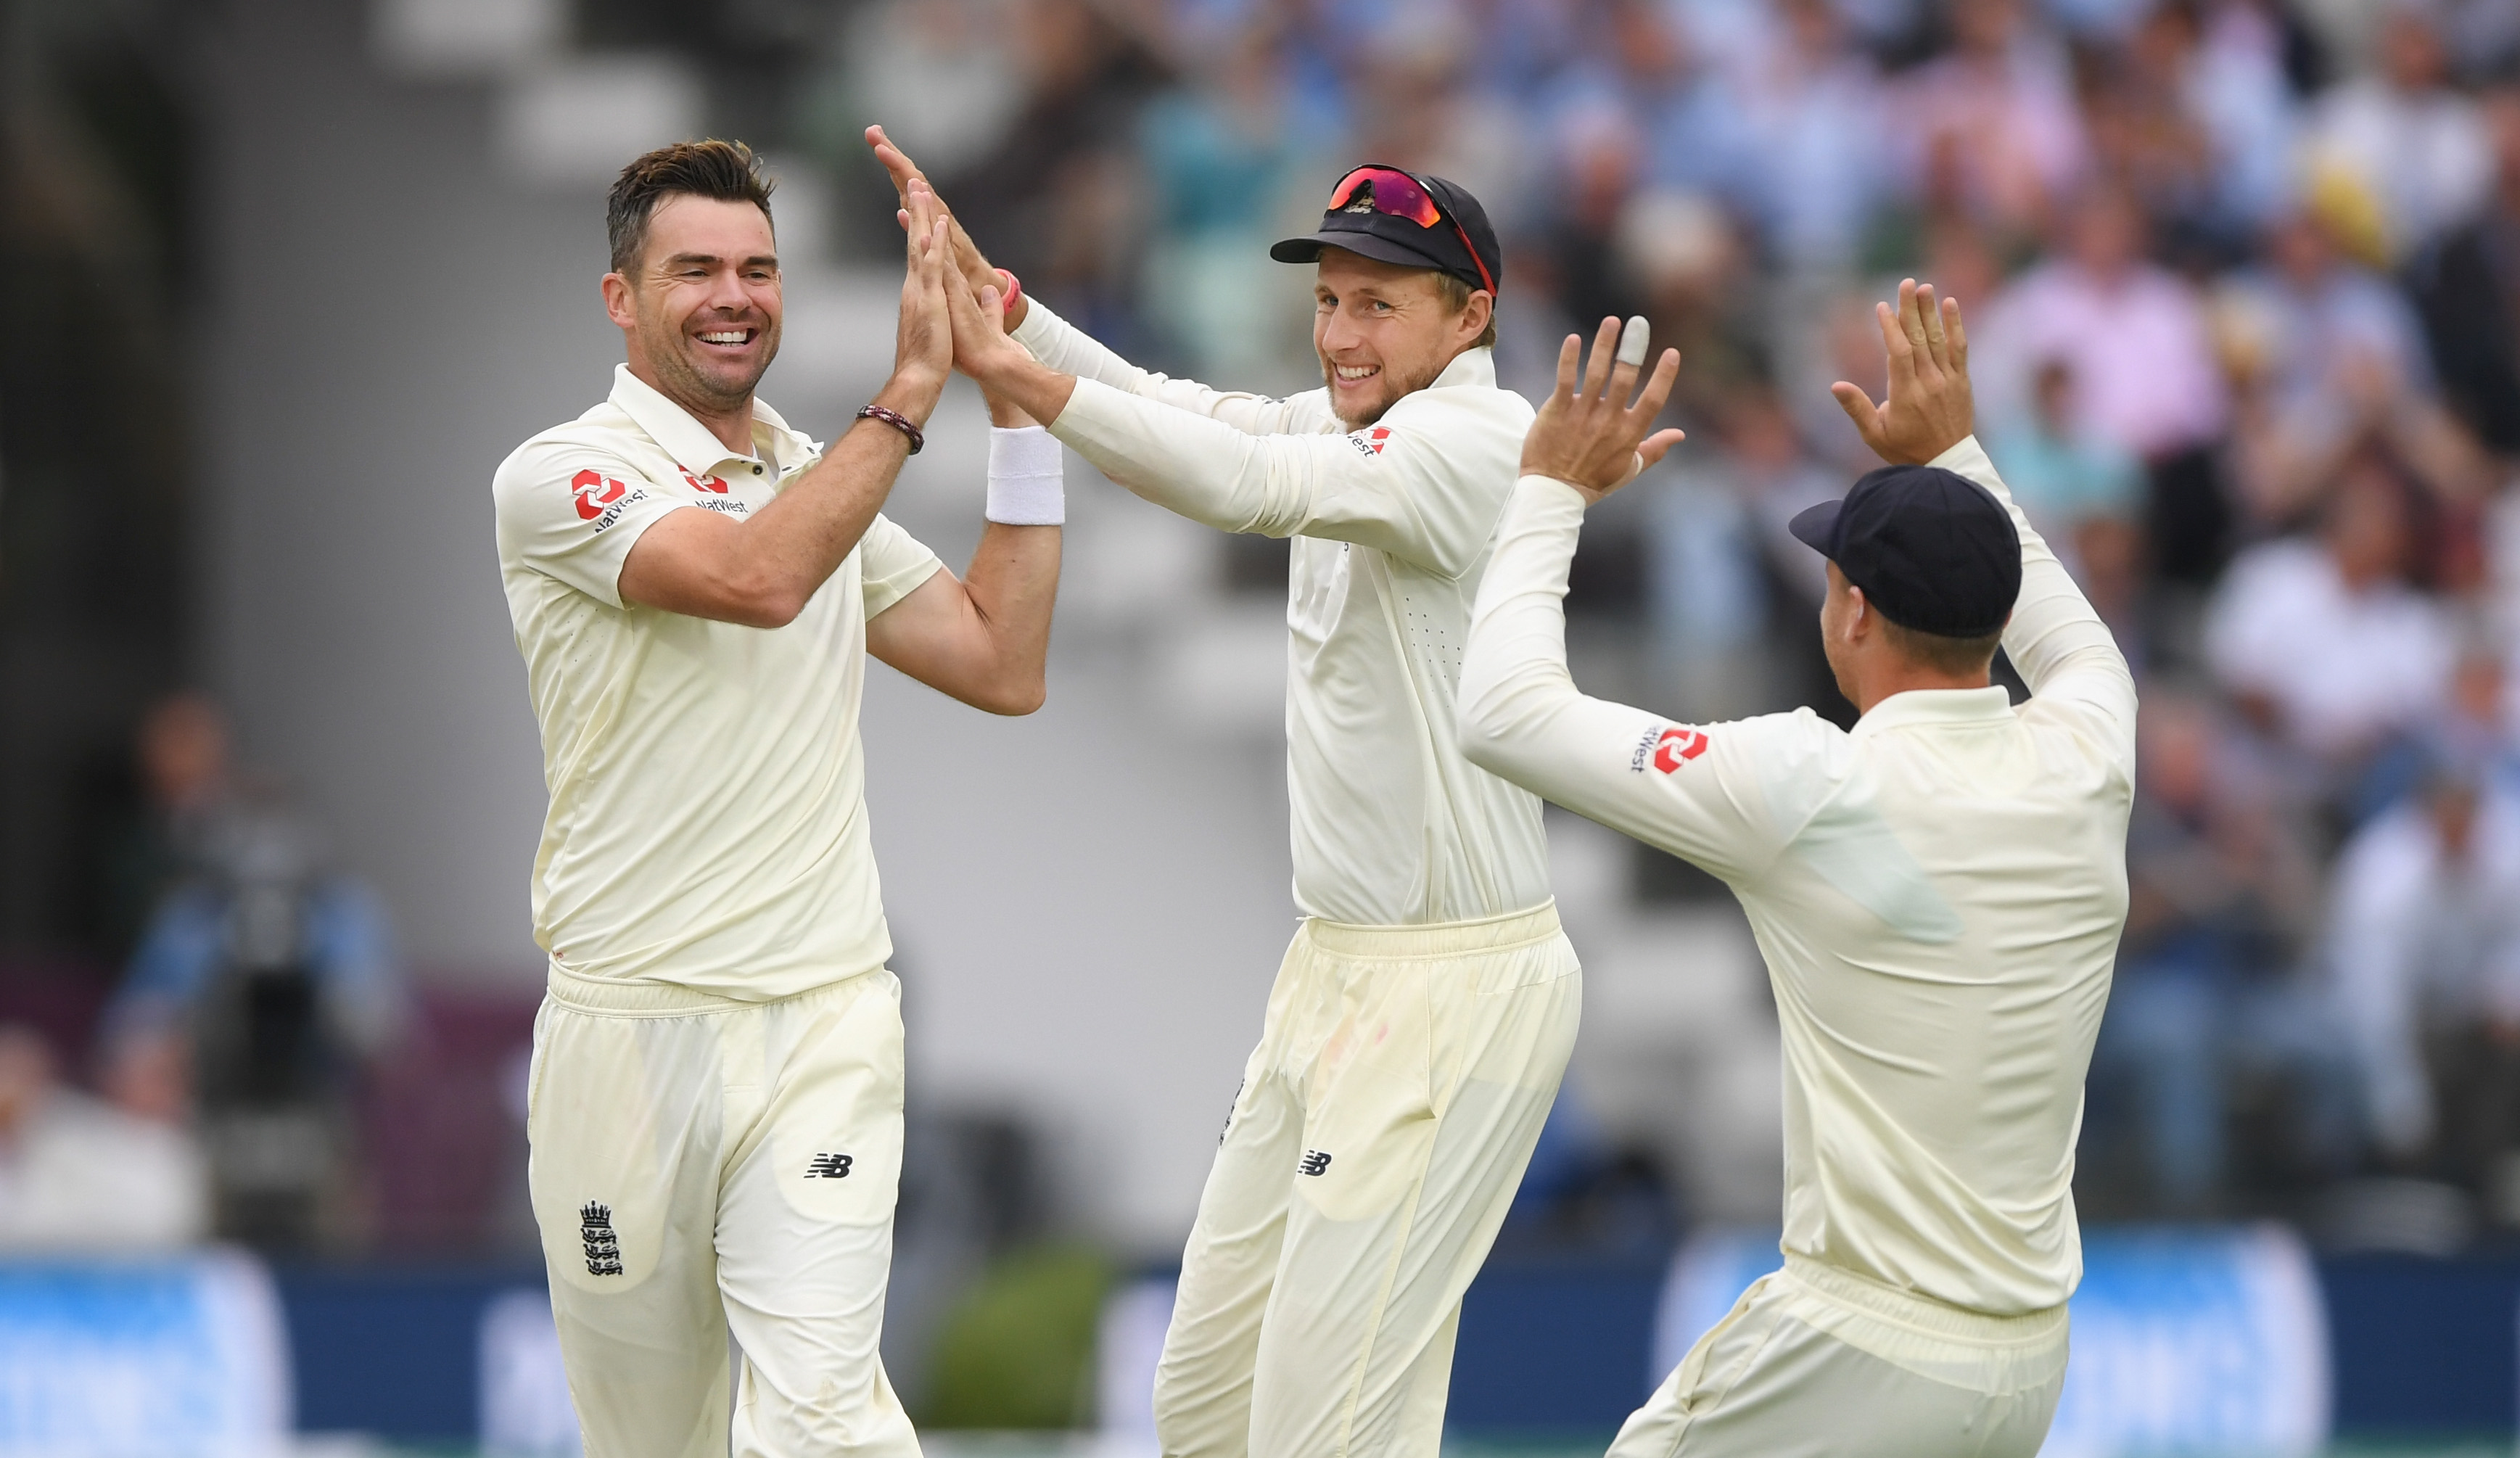 England vs West Indies | Predictions for Day 3 at the Ageas Bowl